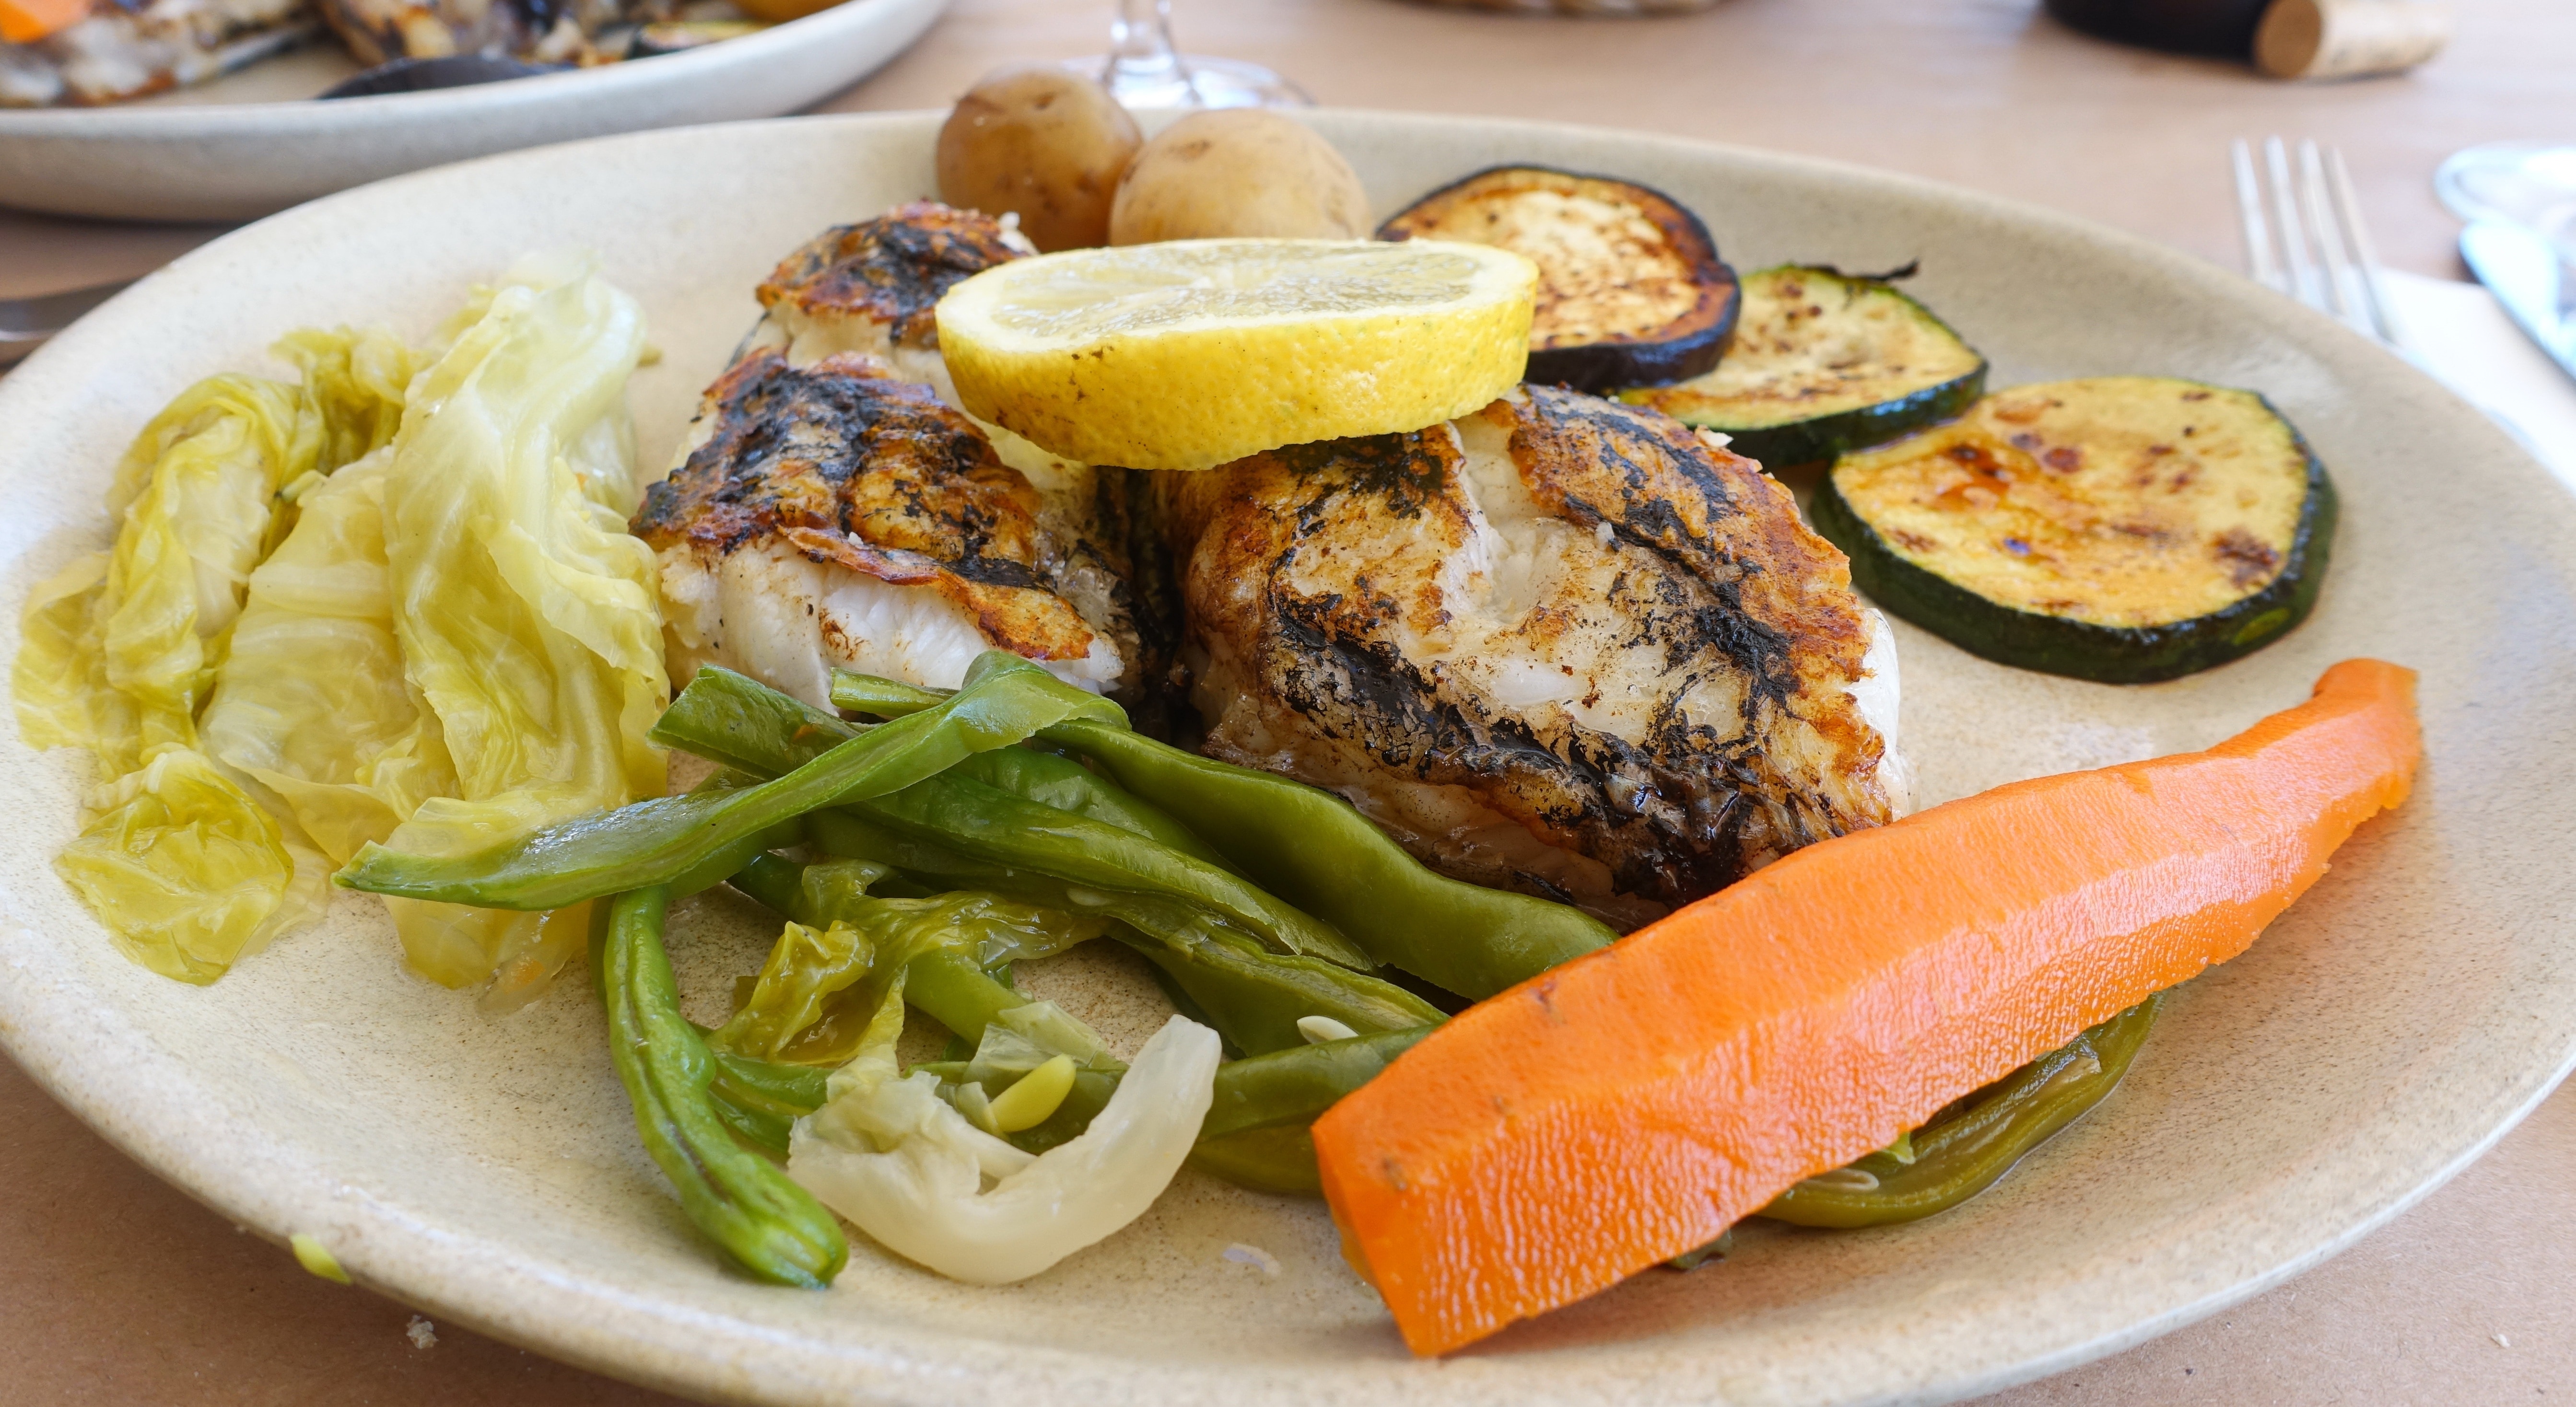 grilled fish and vegetable sides